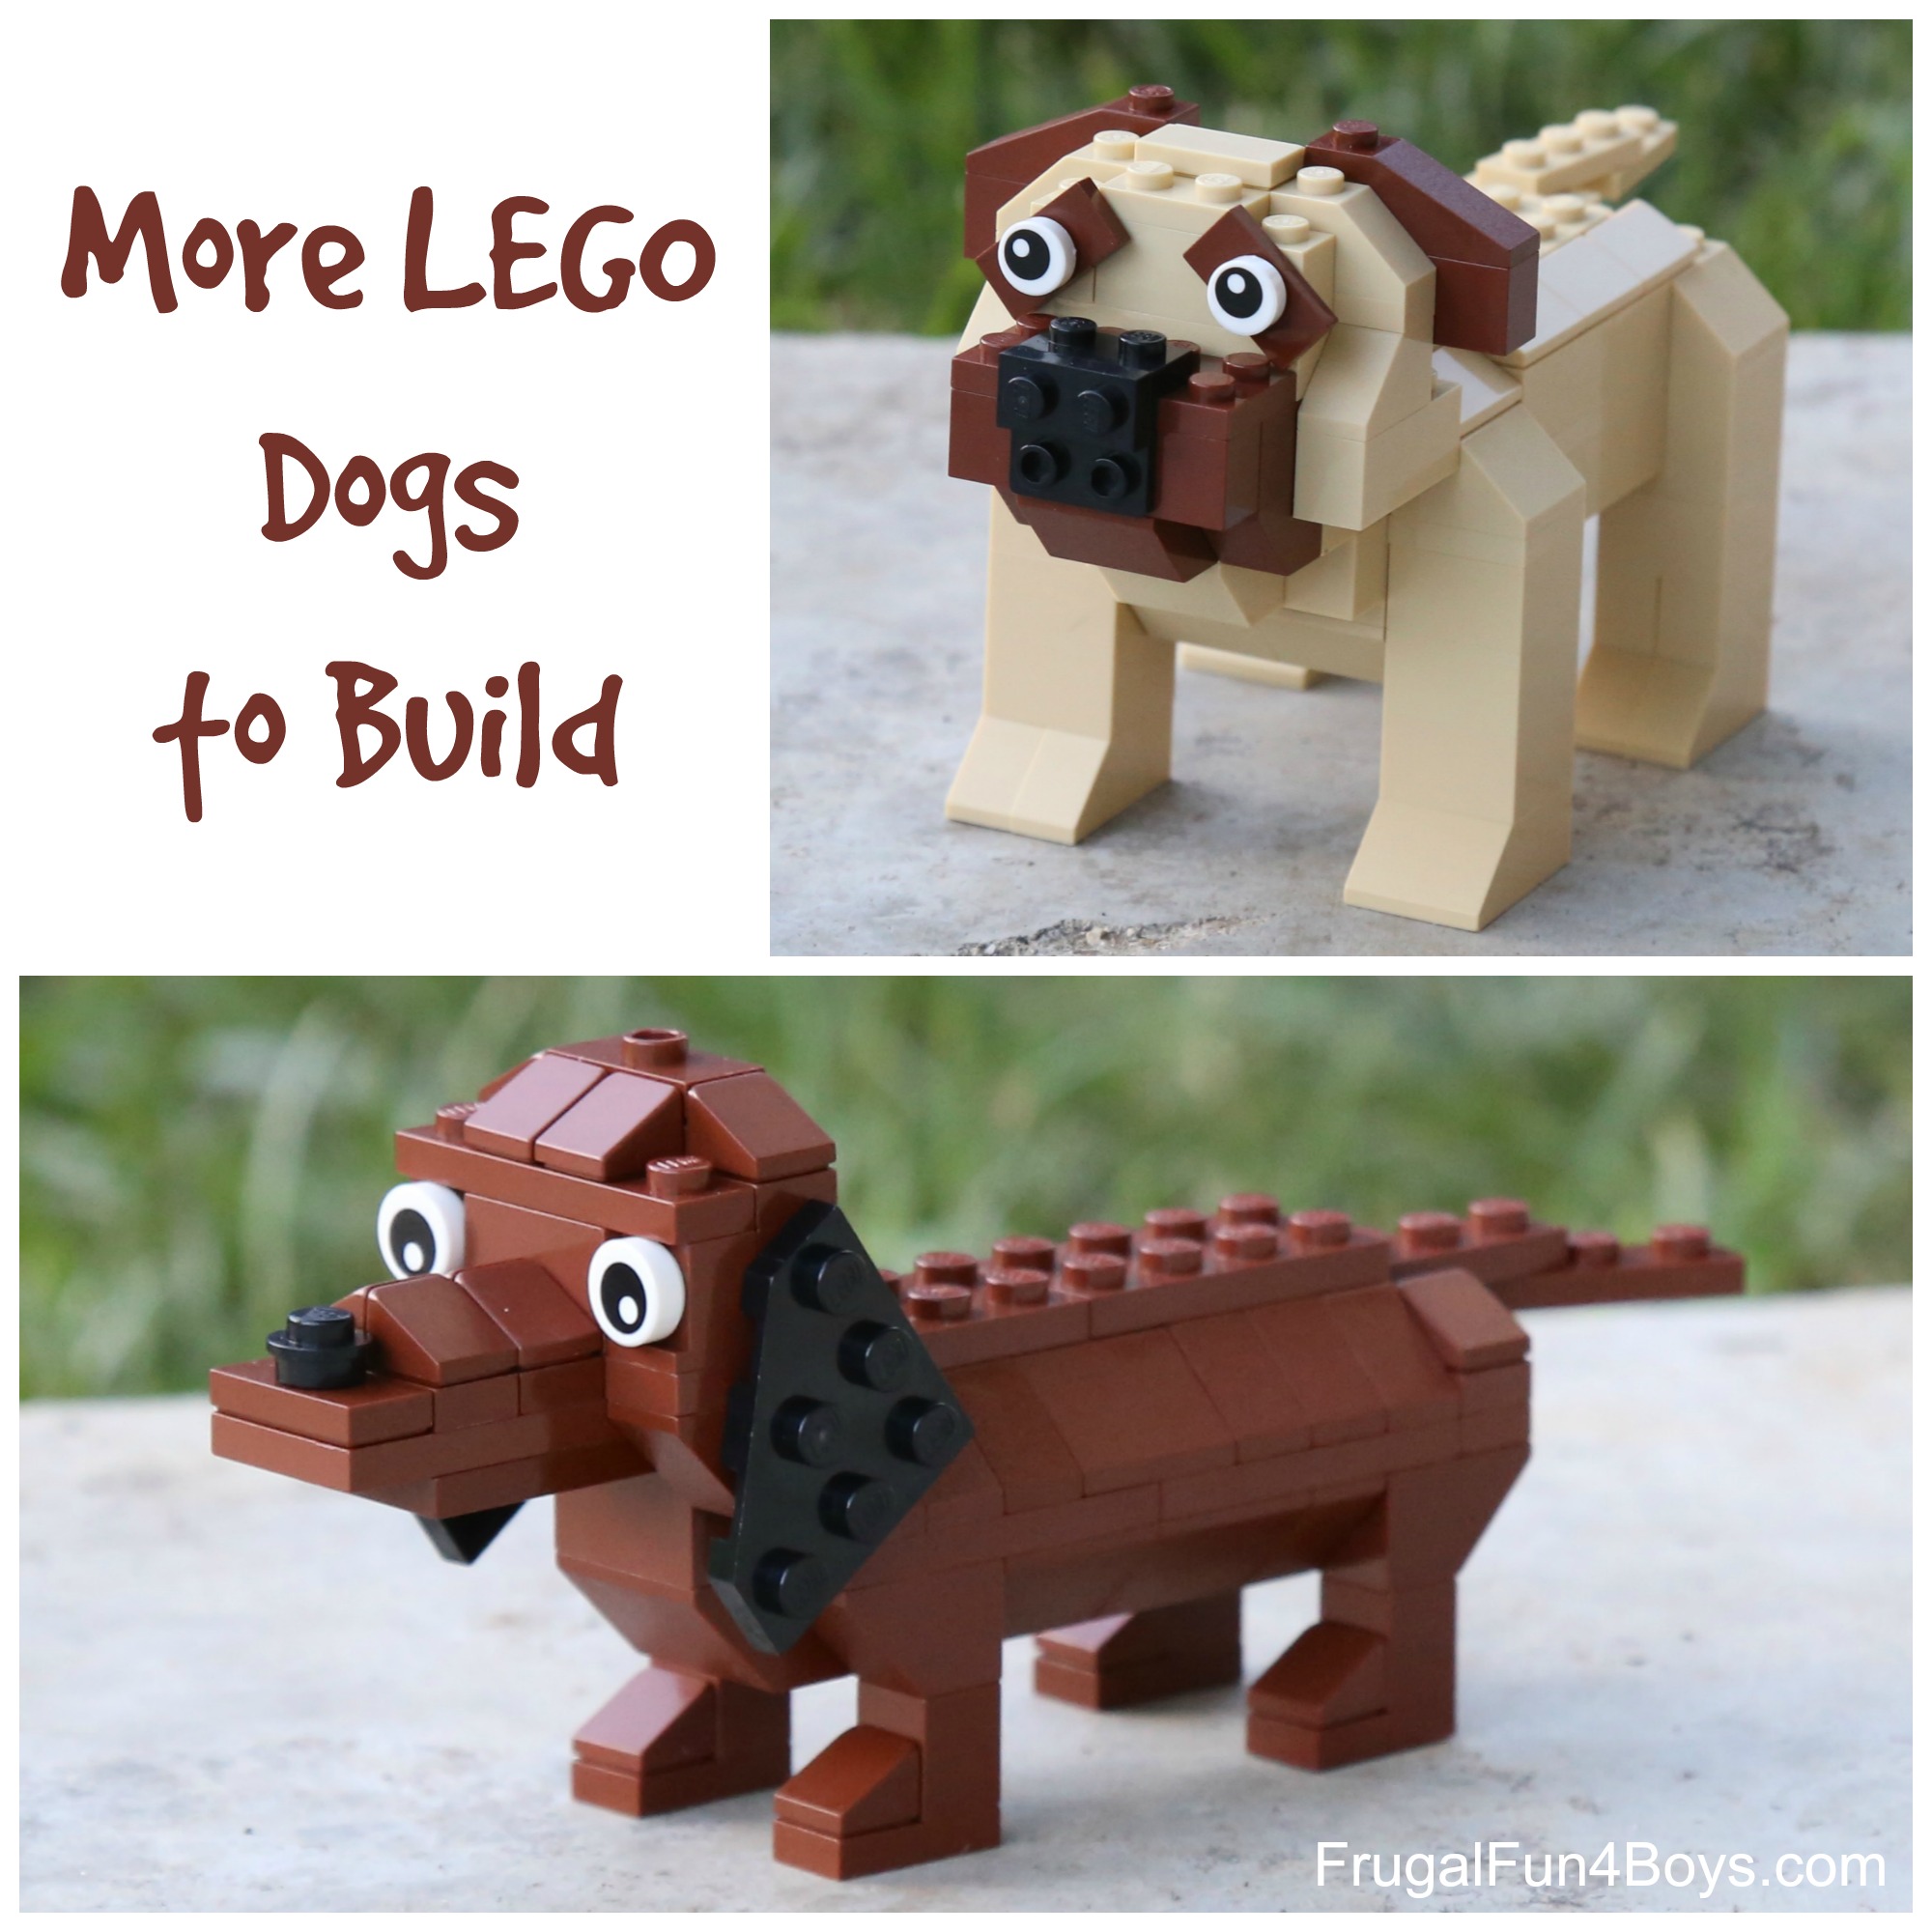 More lego dogs FB